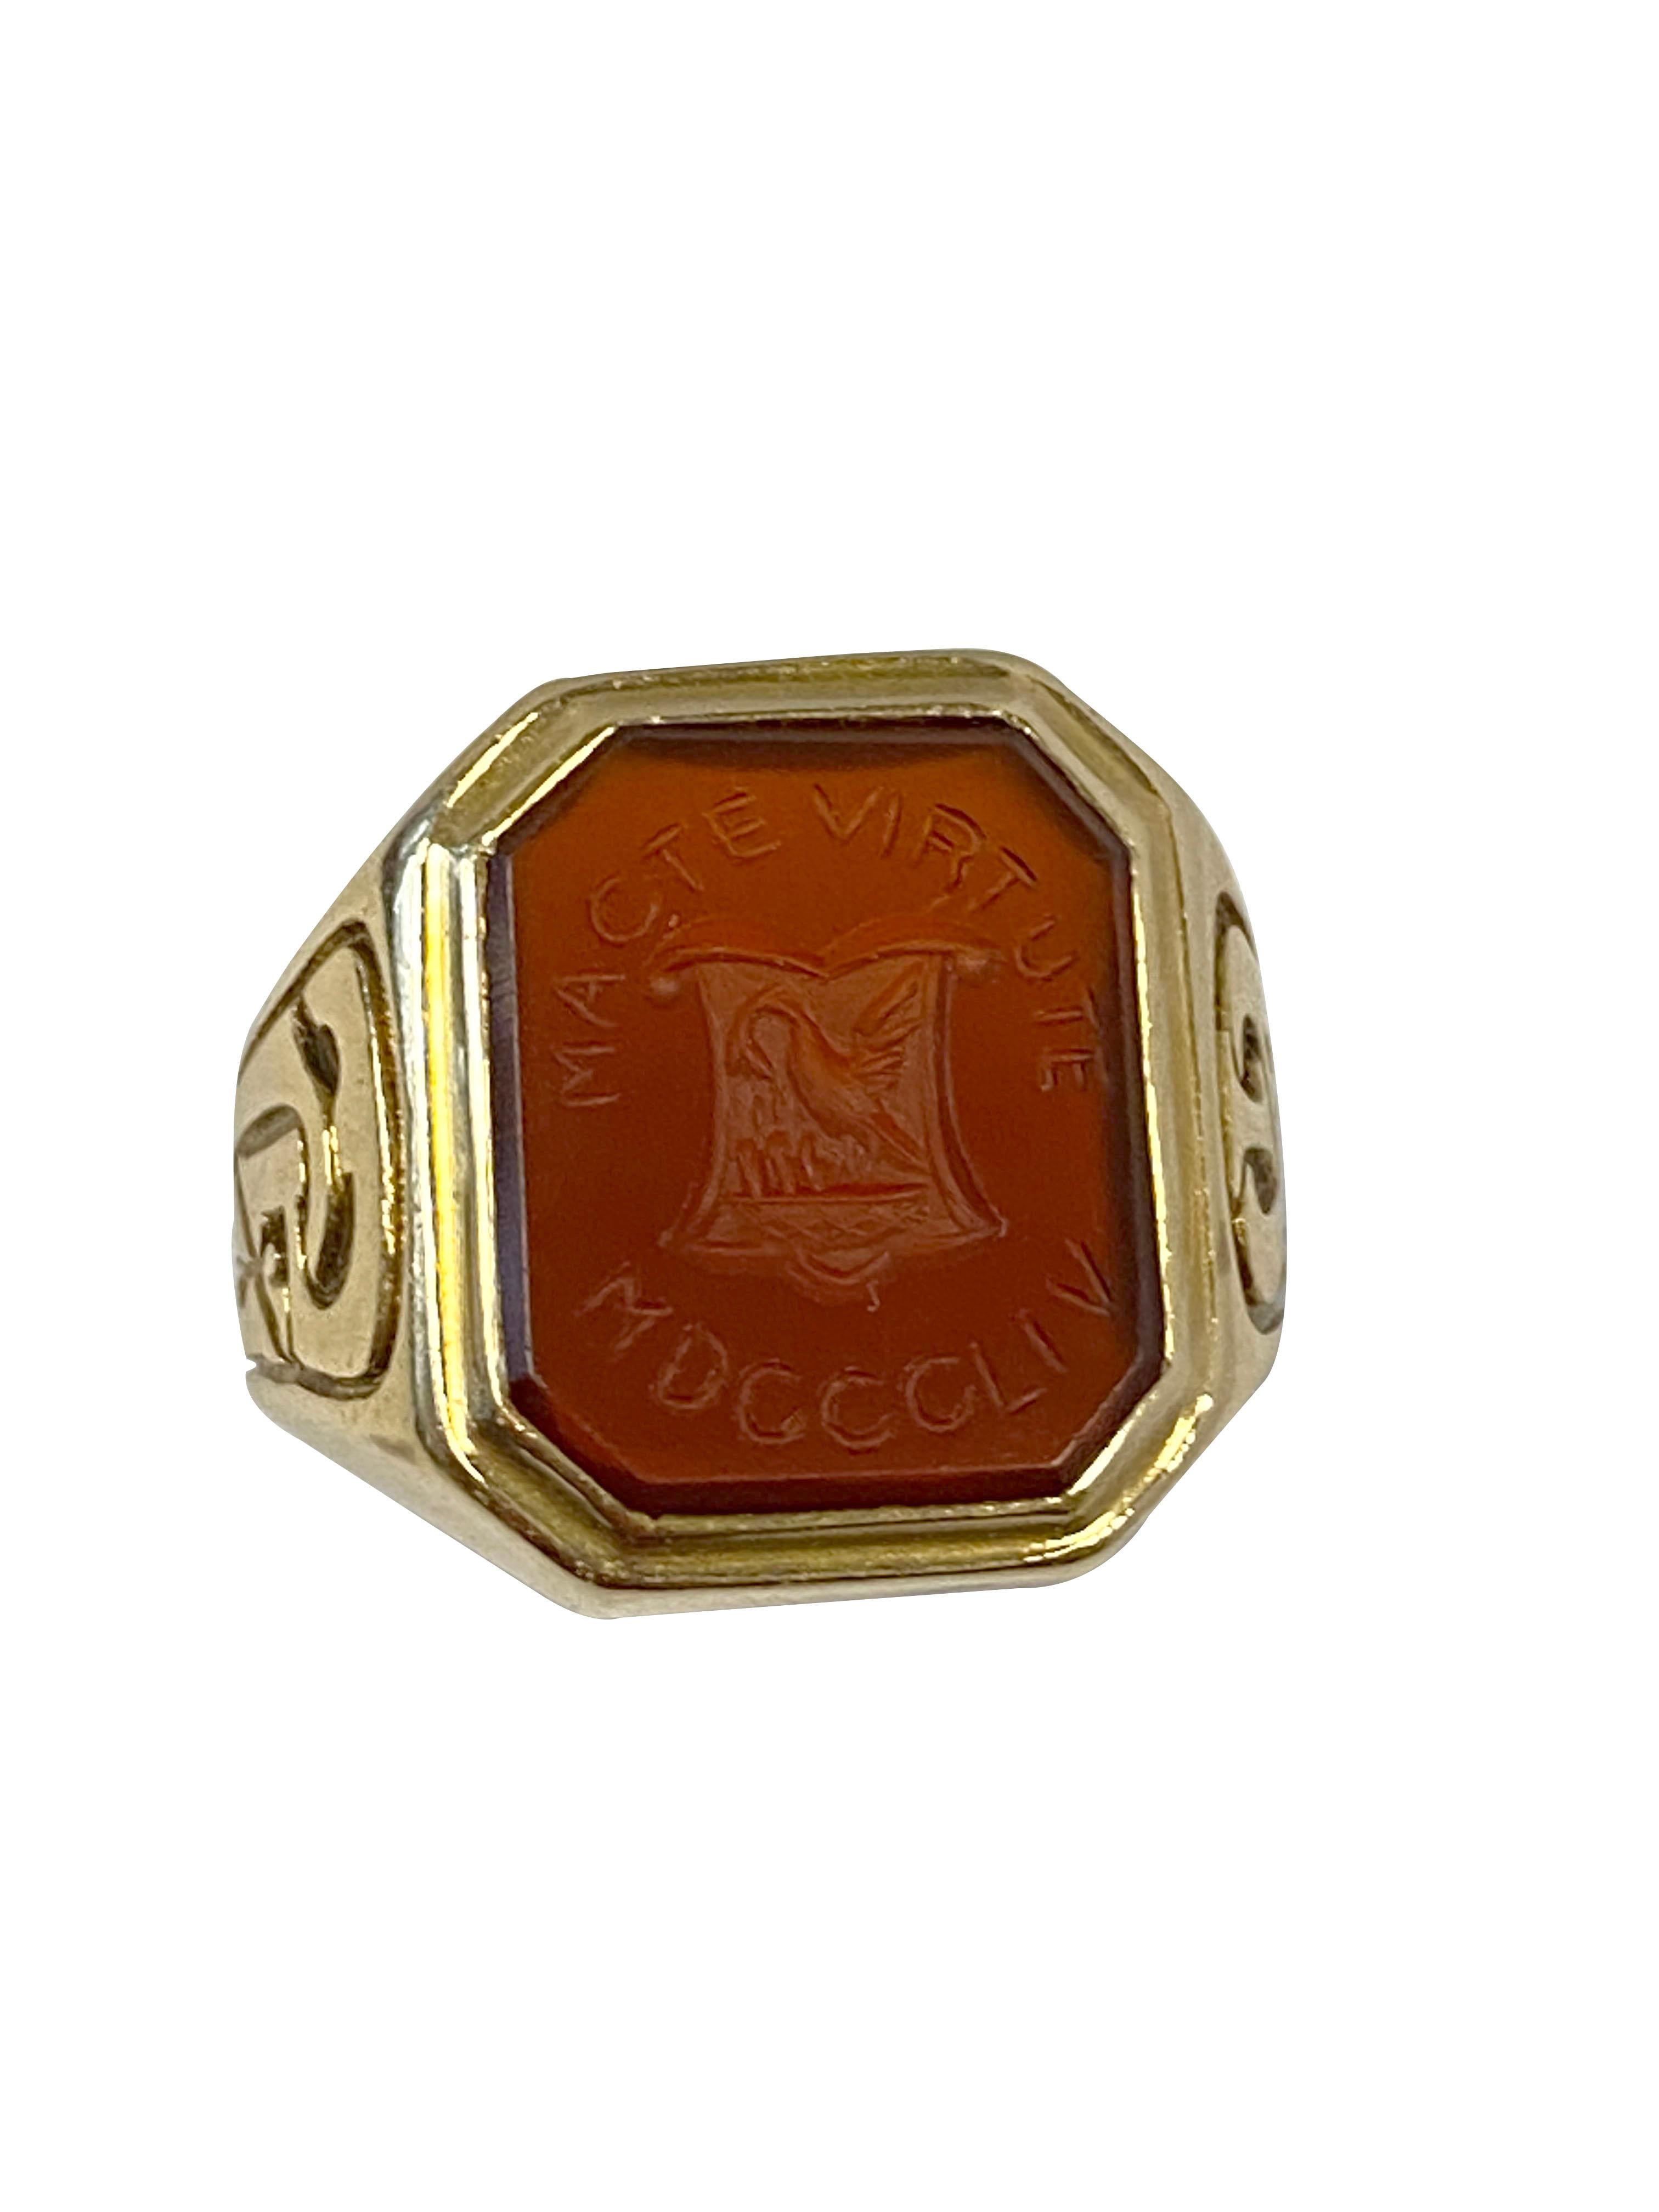 Circa 1917 Tiffany & Company 14k Yellow Gold Signet Crest Ring, the top measures 1/2 X 1/2 inch and is set with a Carnelian that is Engraved with a shield Crest of a Swan or Crane and the Latin Wording 